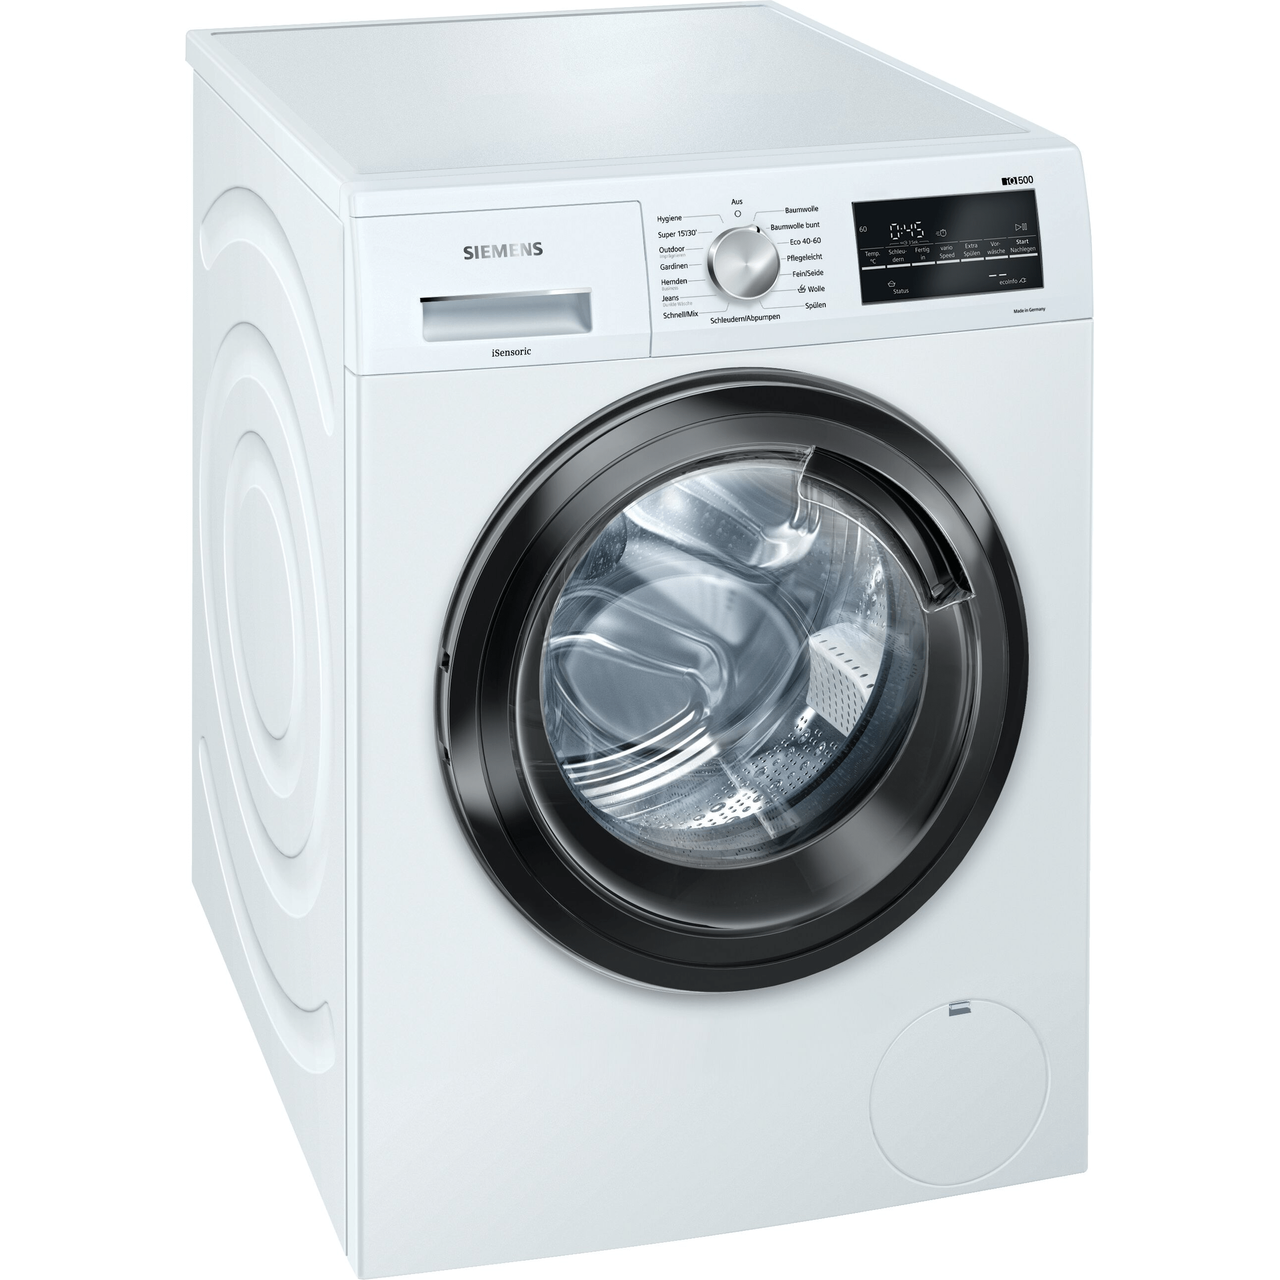 zal ik doen Fraude inval Siemens WM14G400 wasmachine Made in Germany - Hermans Trading Witgoed Outlet